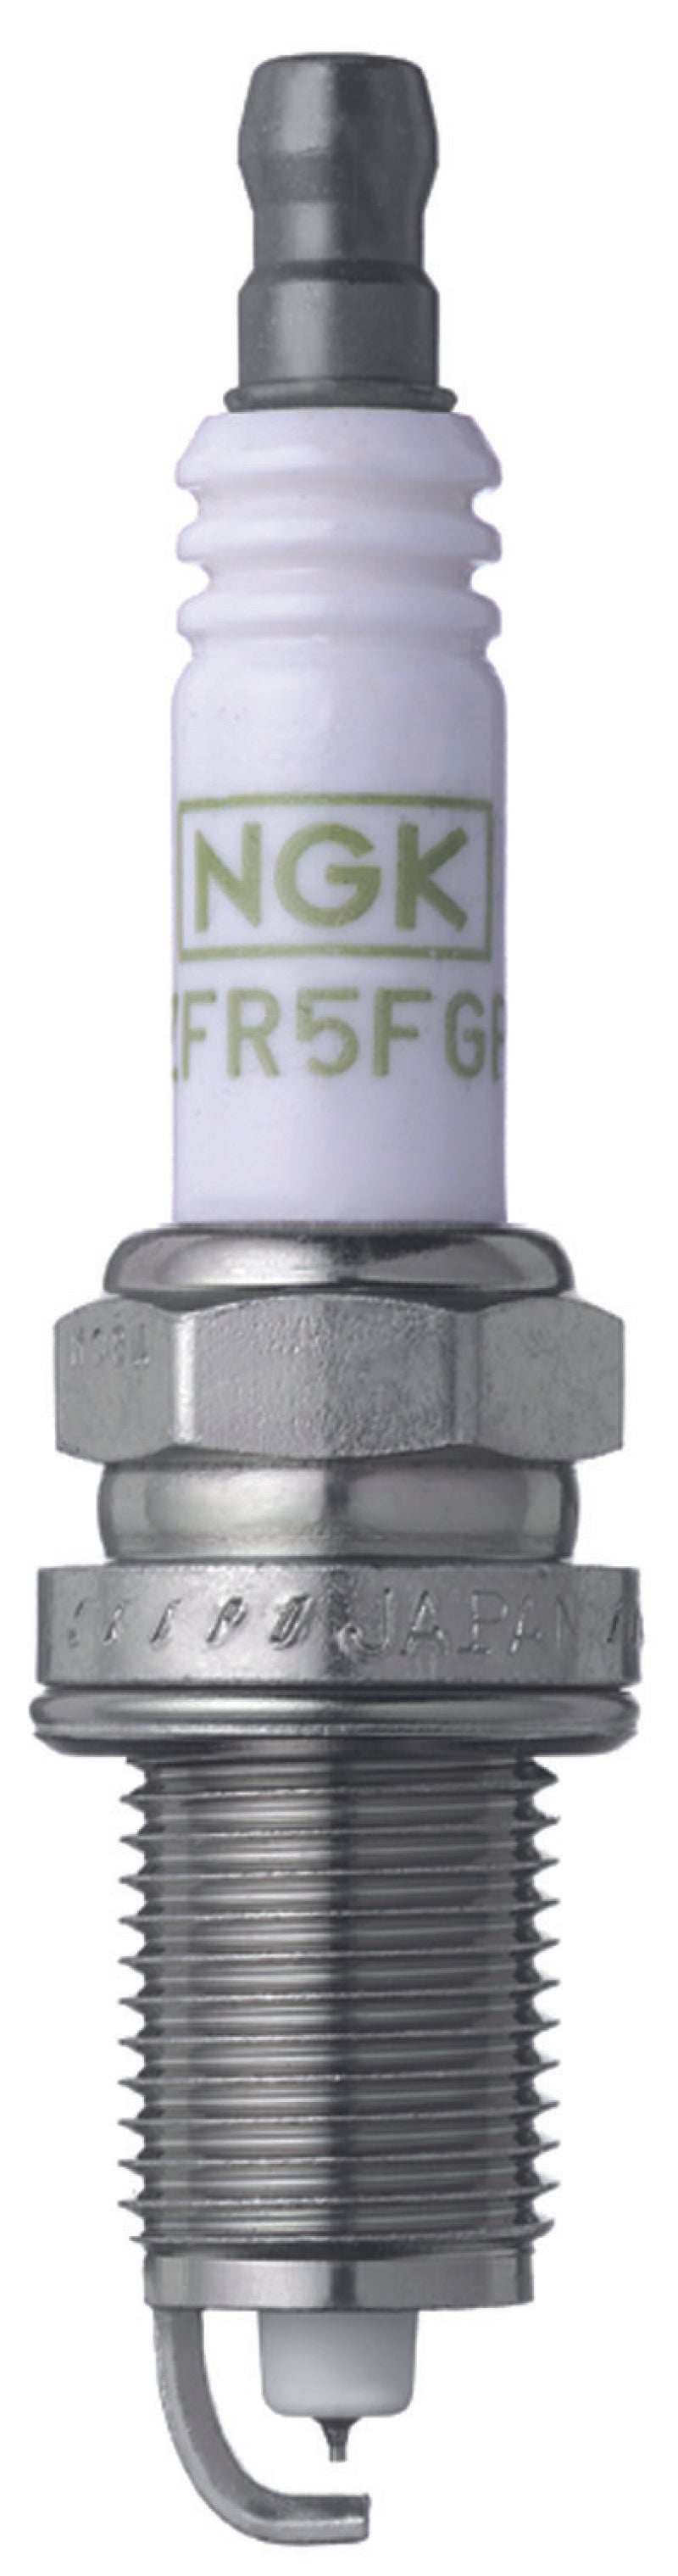 NGK G-Power Spark Plug Box of 4 (ZFR6AGP) -  Shop now at Performance Car Parts